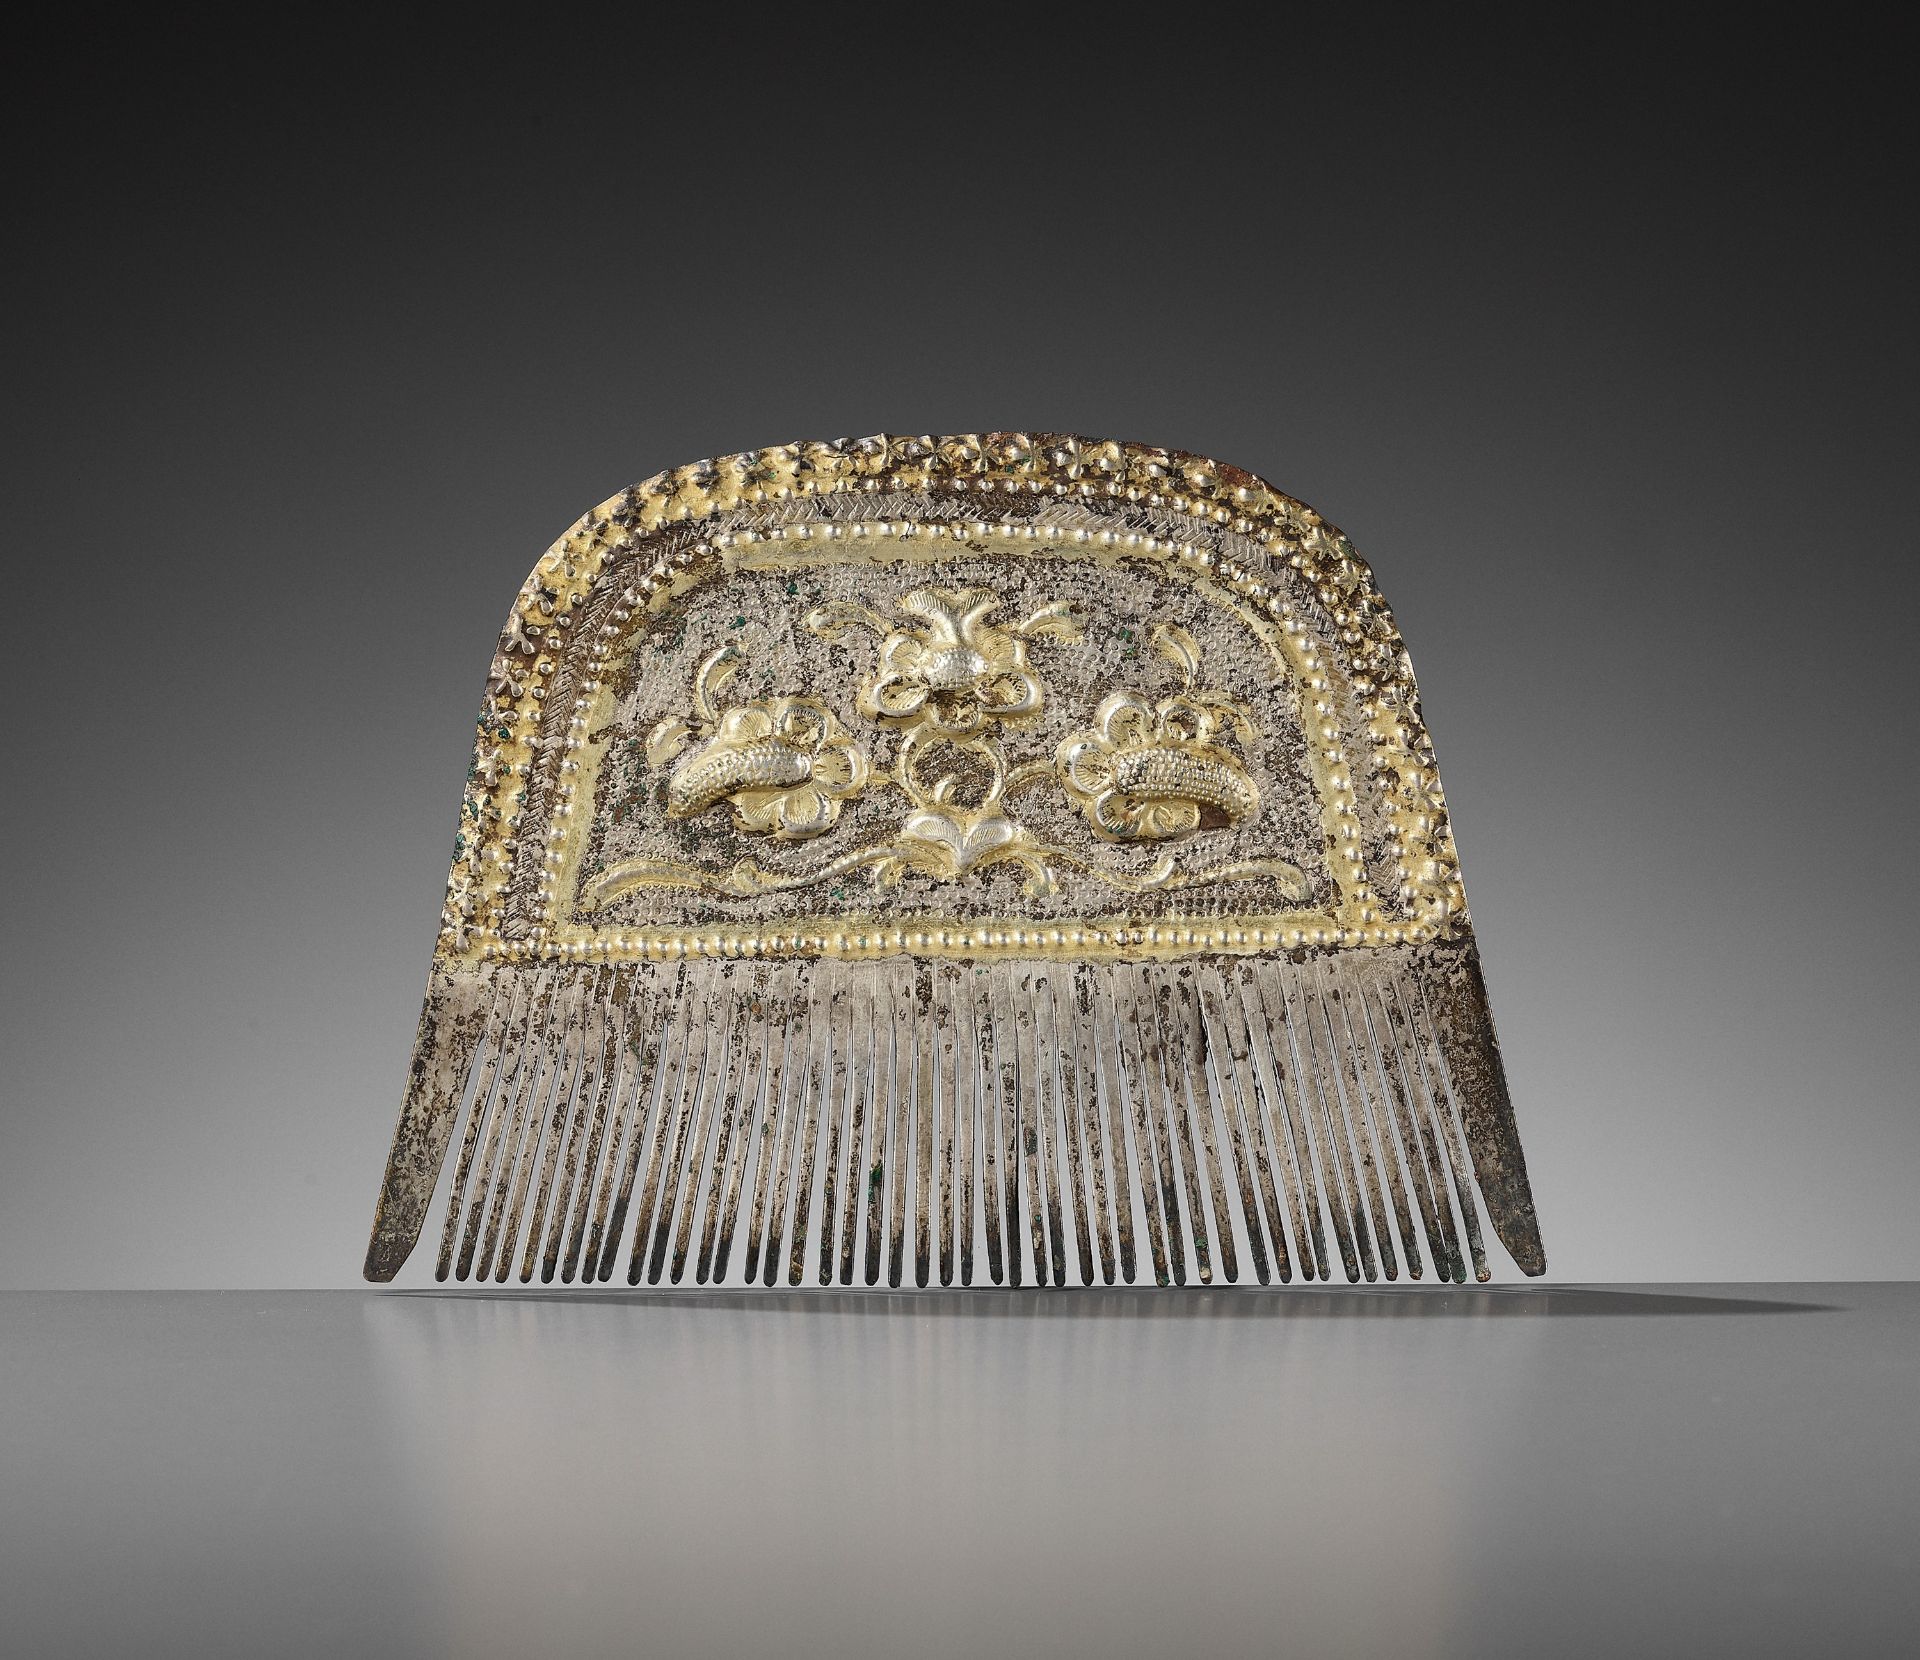 A PARCEL-GILT SILVER COMB, TANG DYNASTY